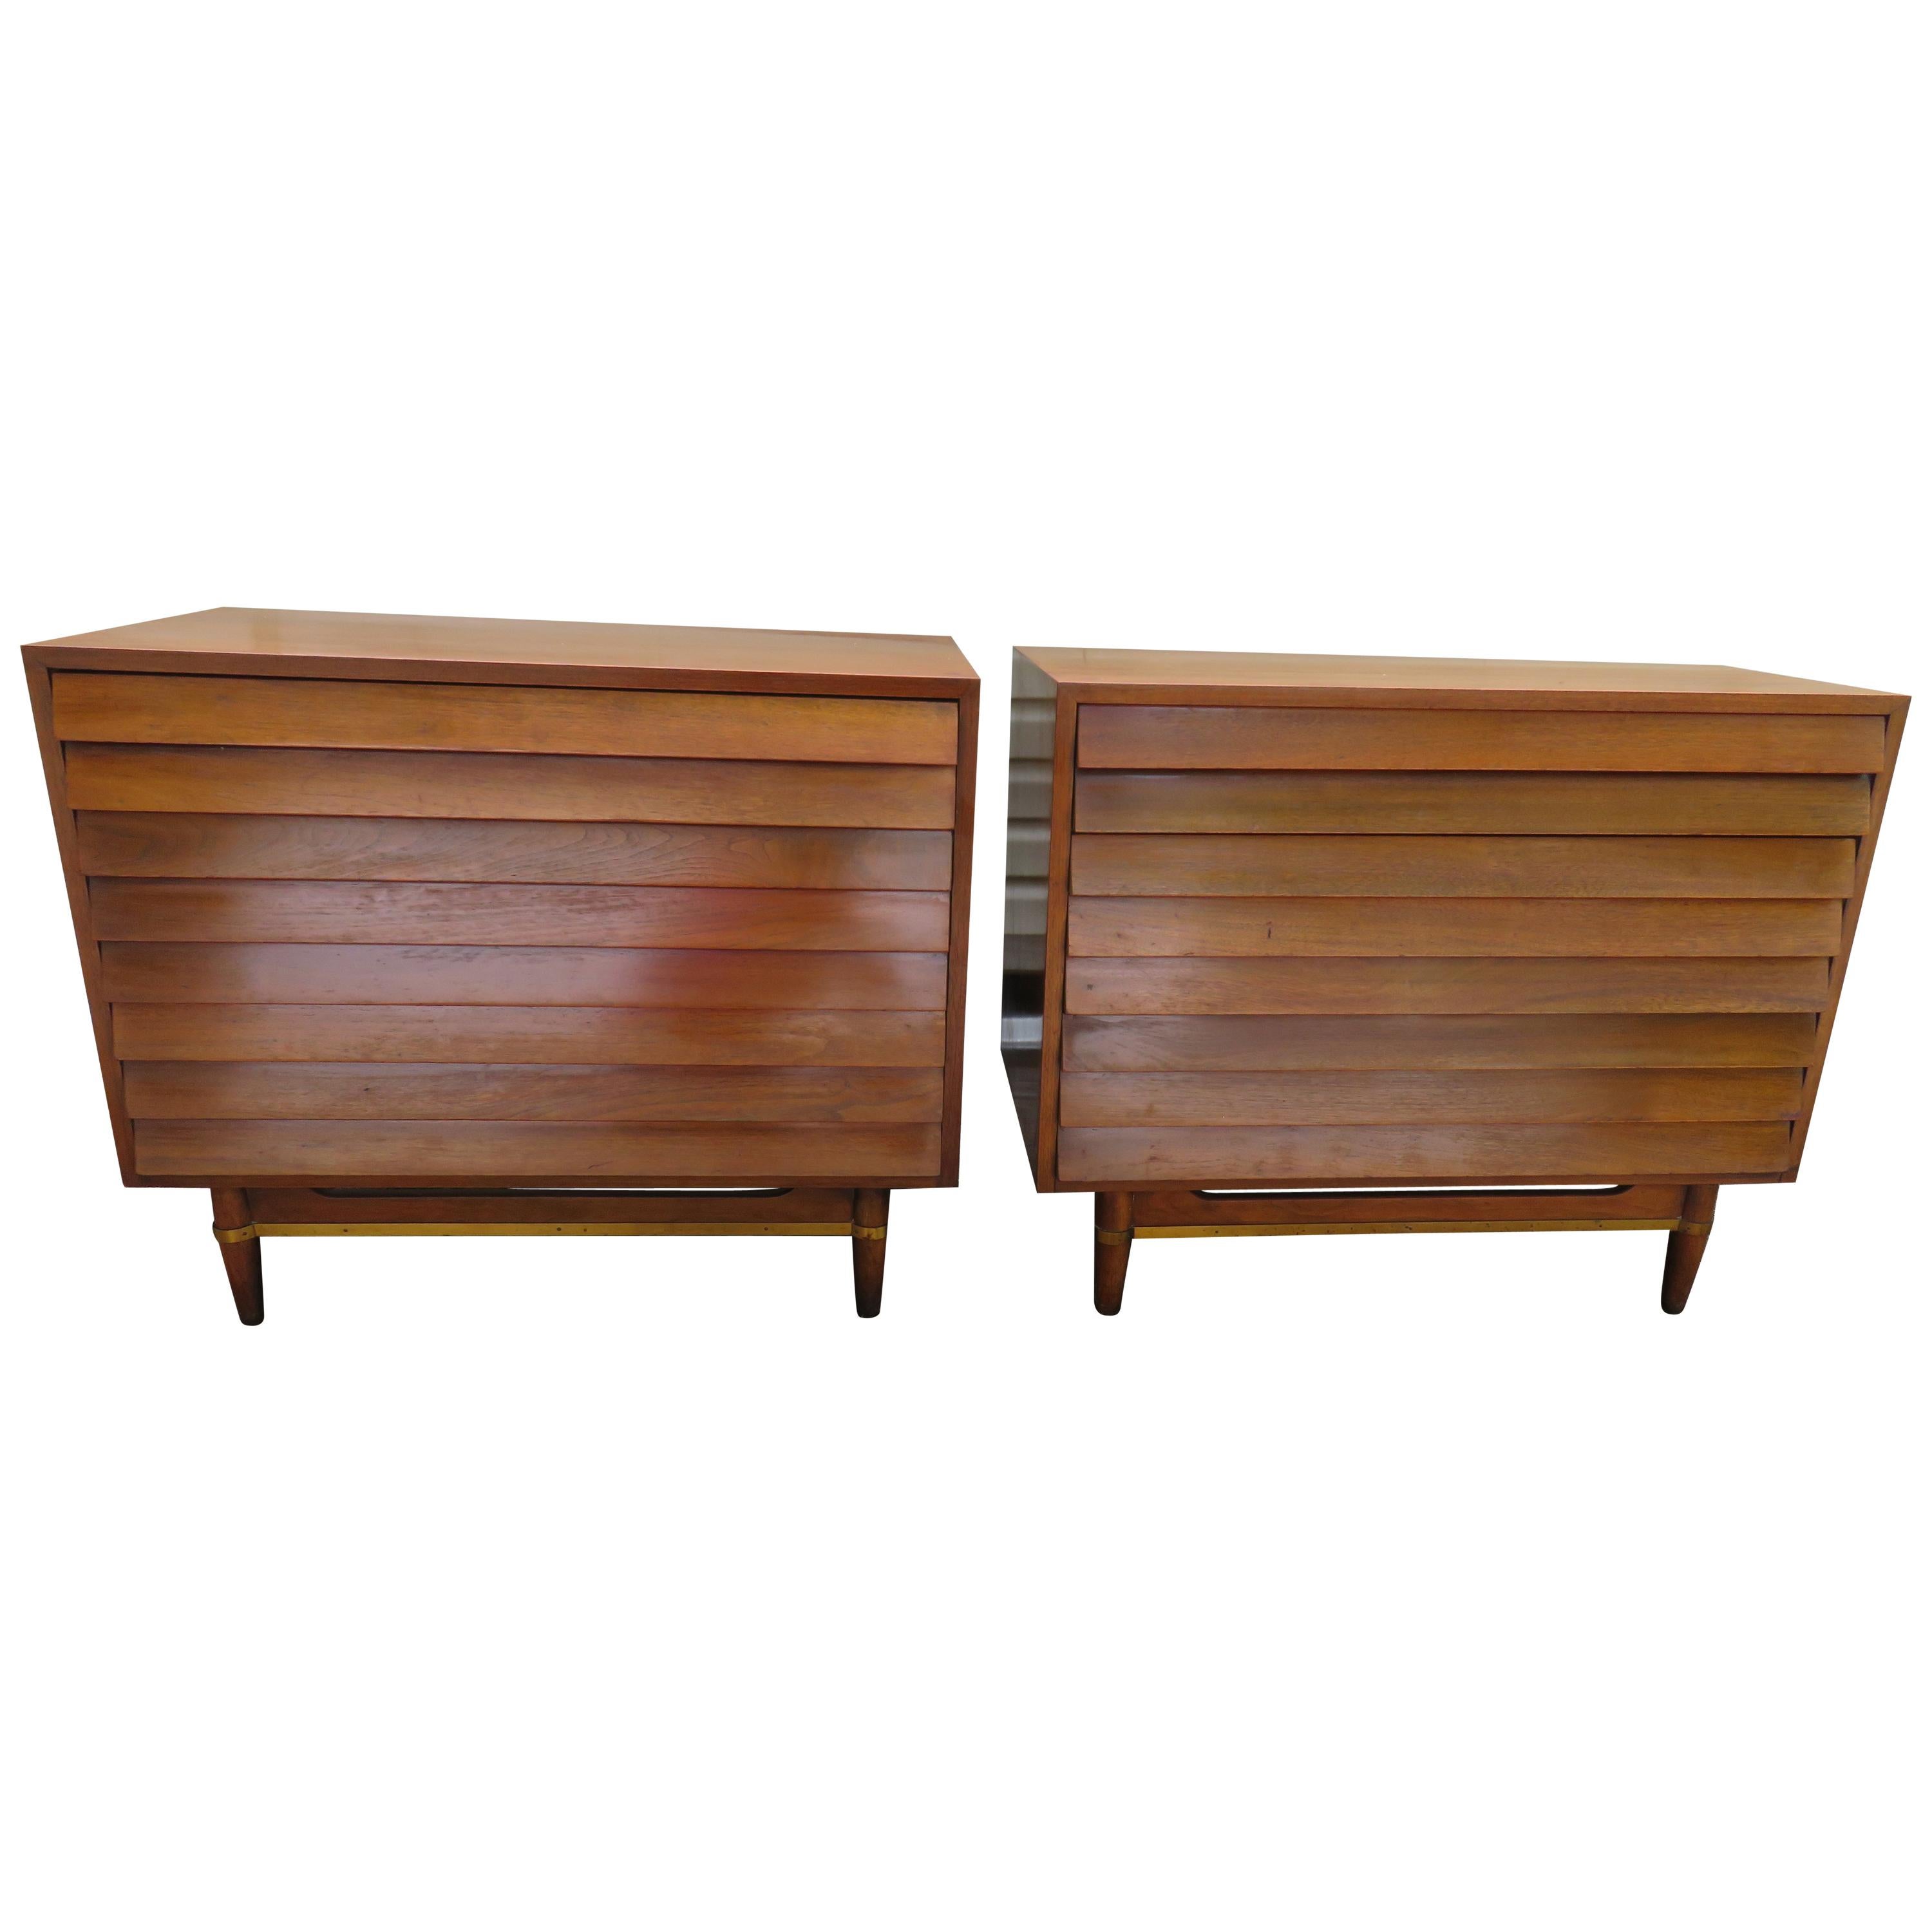 Stunning Pair American of Martinsville Walnut Brass Louvered Bachelors Chests